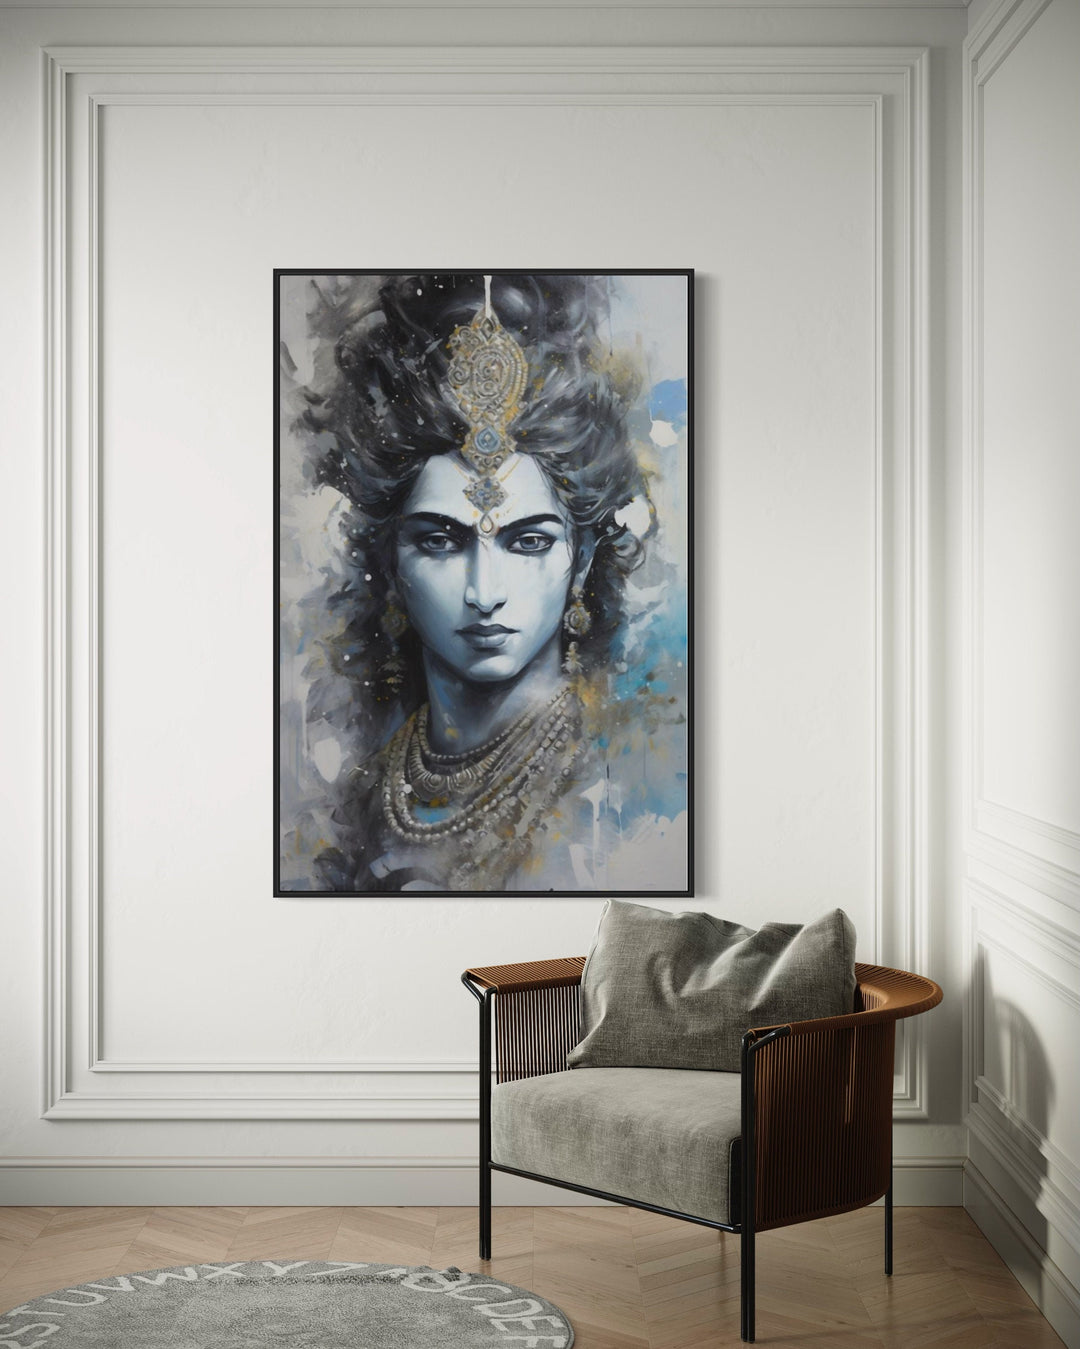 Lord Krishna Abstract Painting Indian Wall Art near armchair